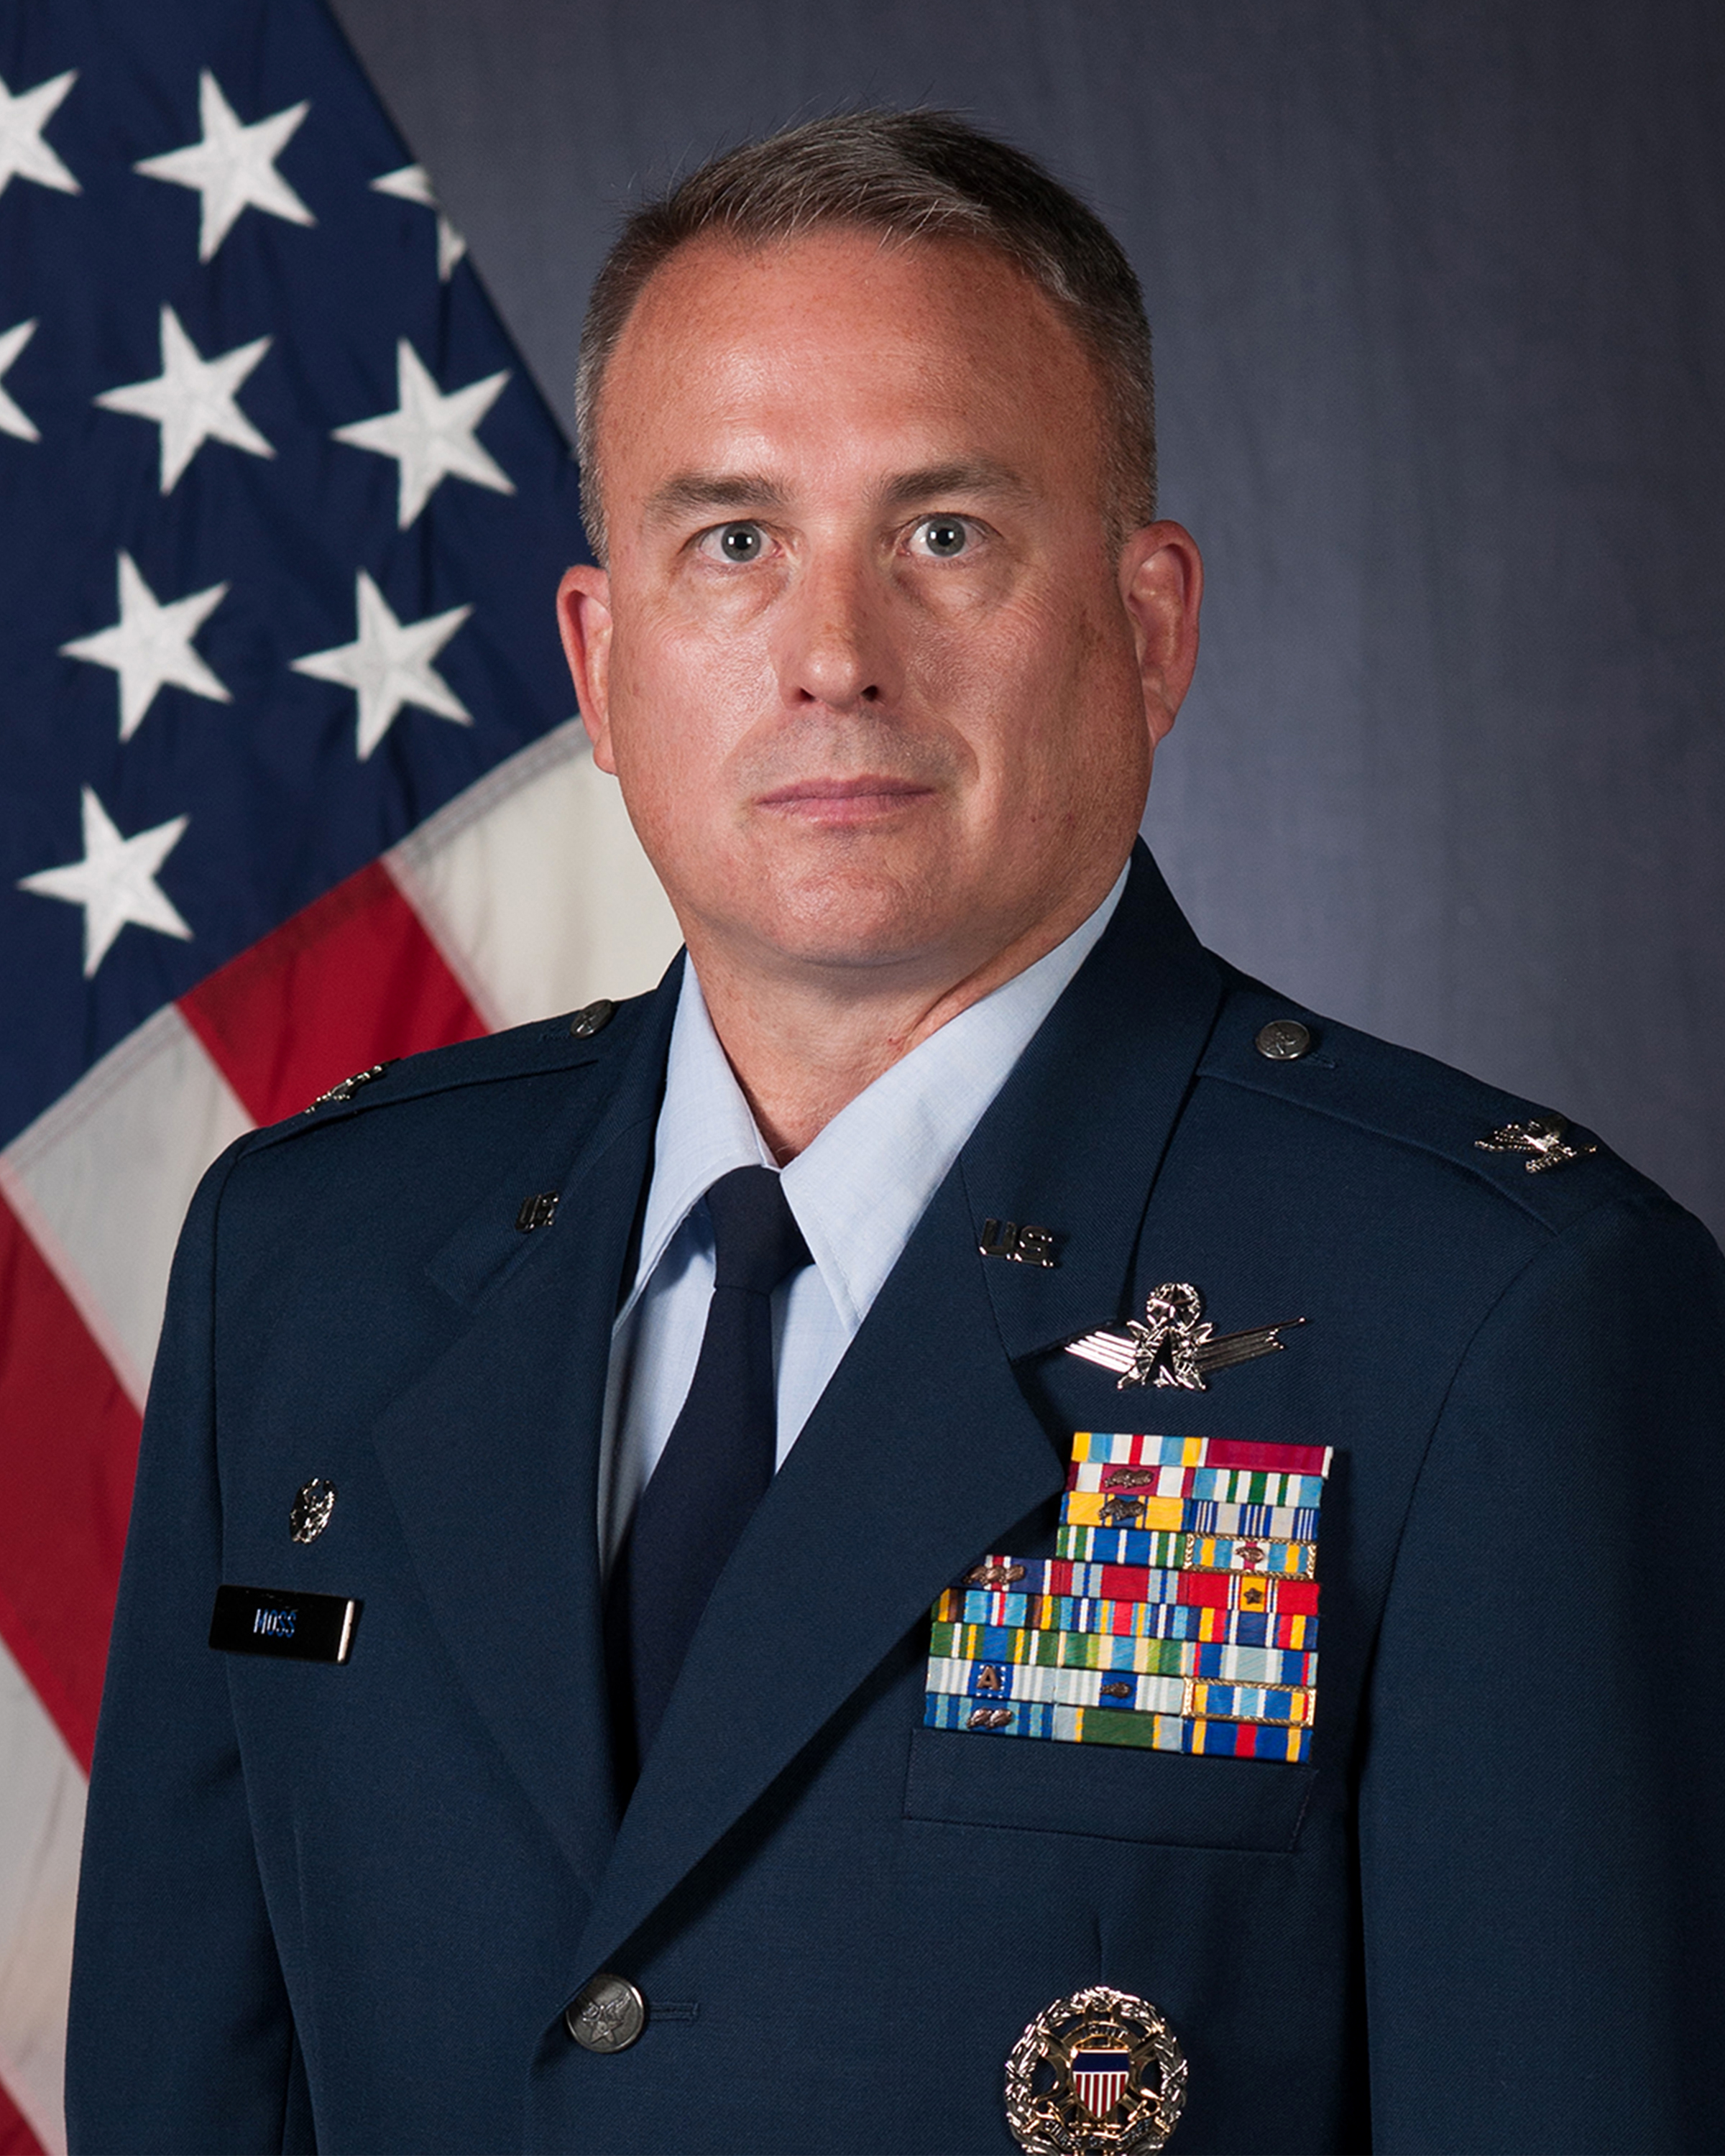 Col. J. Christopher Moss, 30th Space Wing commander